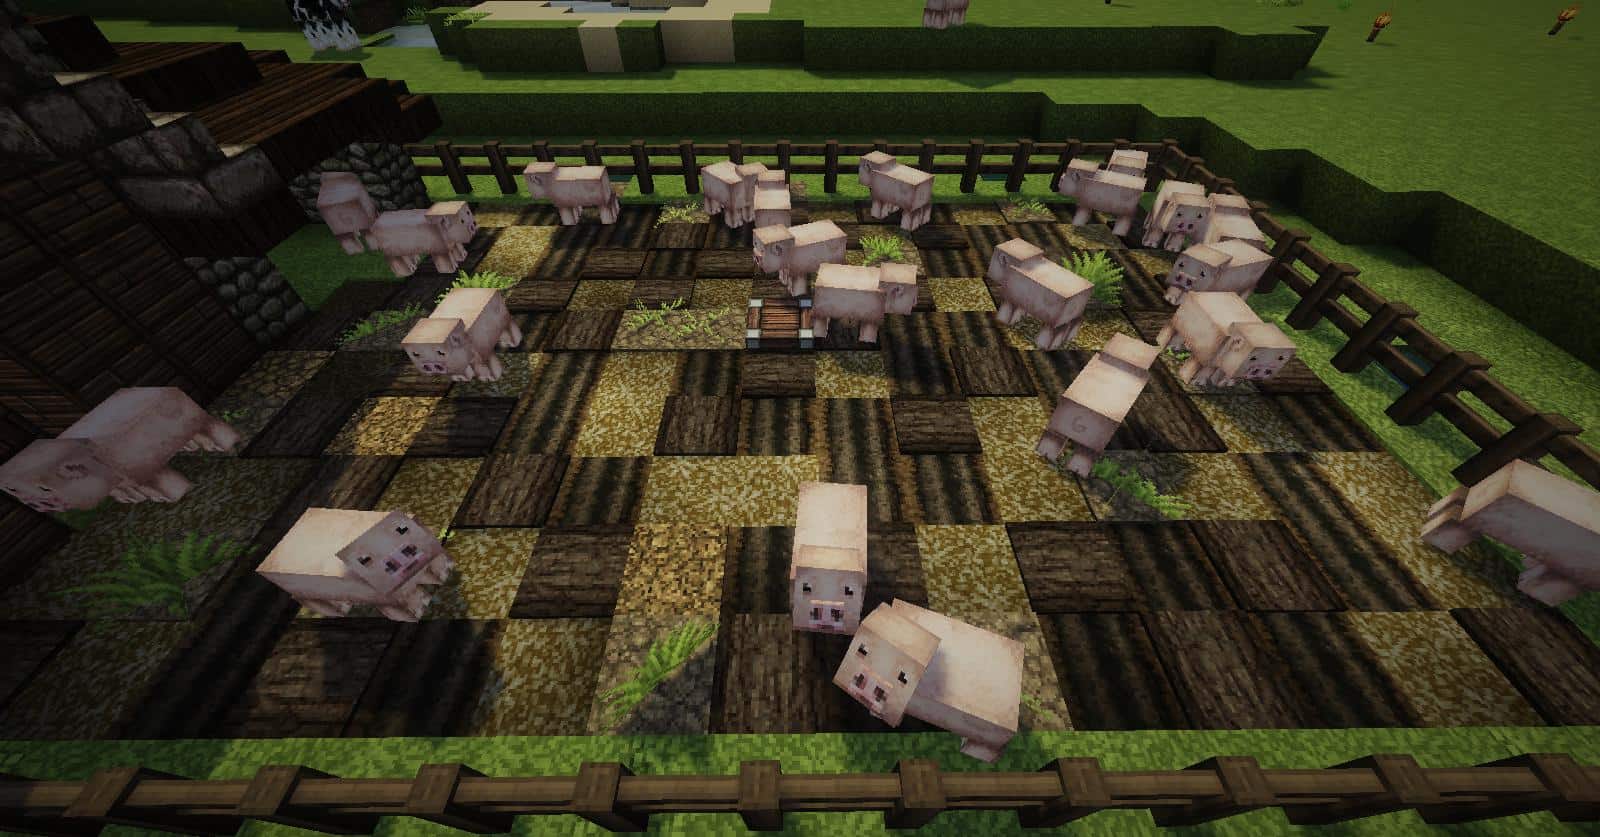 Built with John Smith textures in mind muddy pig pen detail minecraft ideas farm harvest animals cage